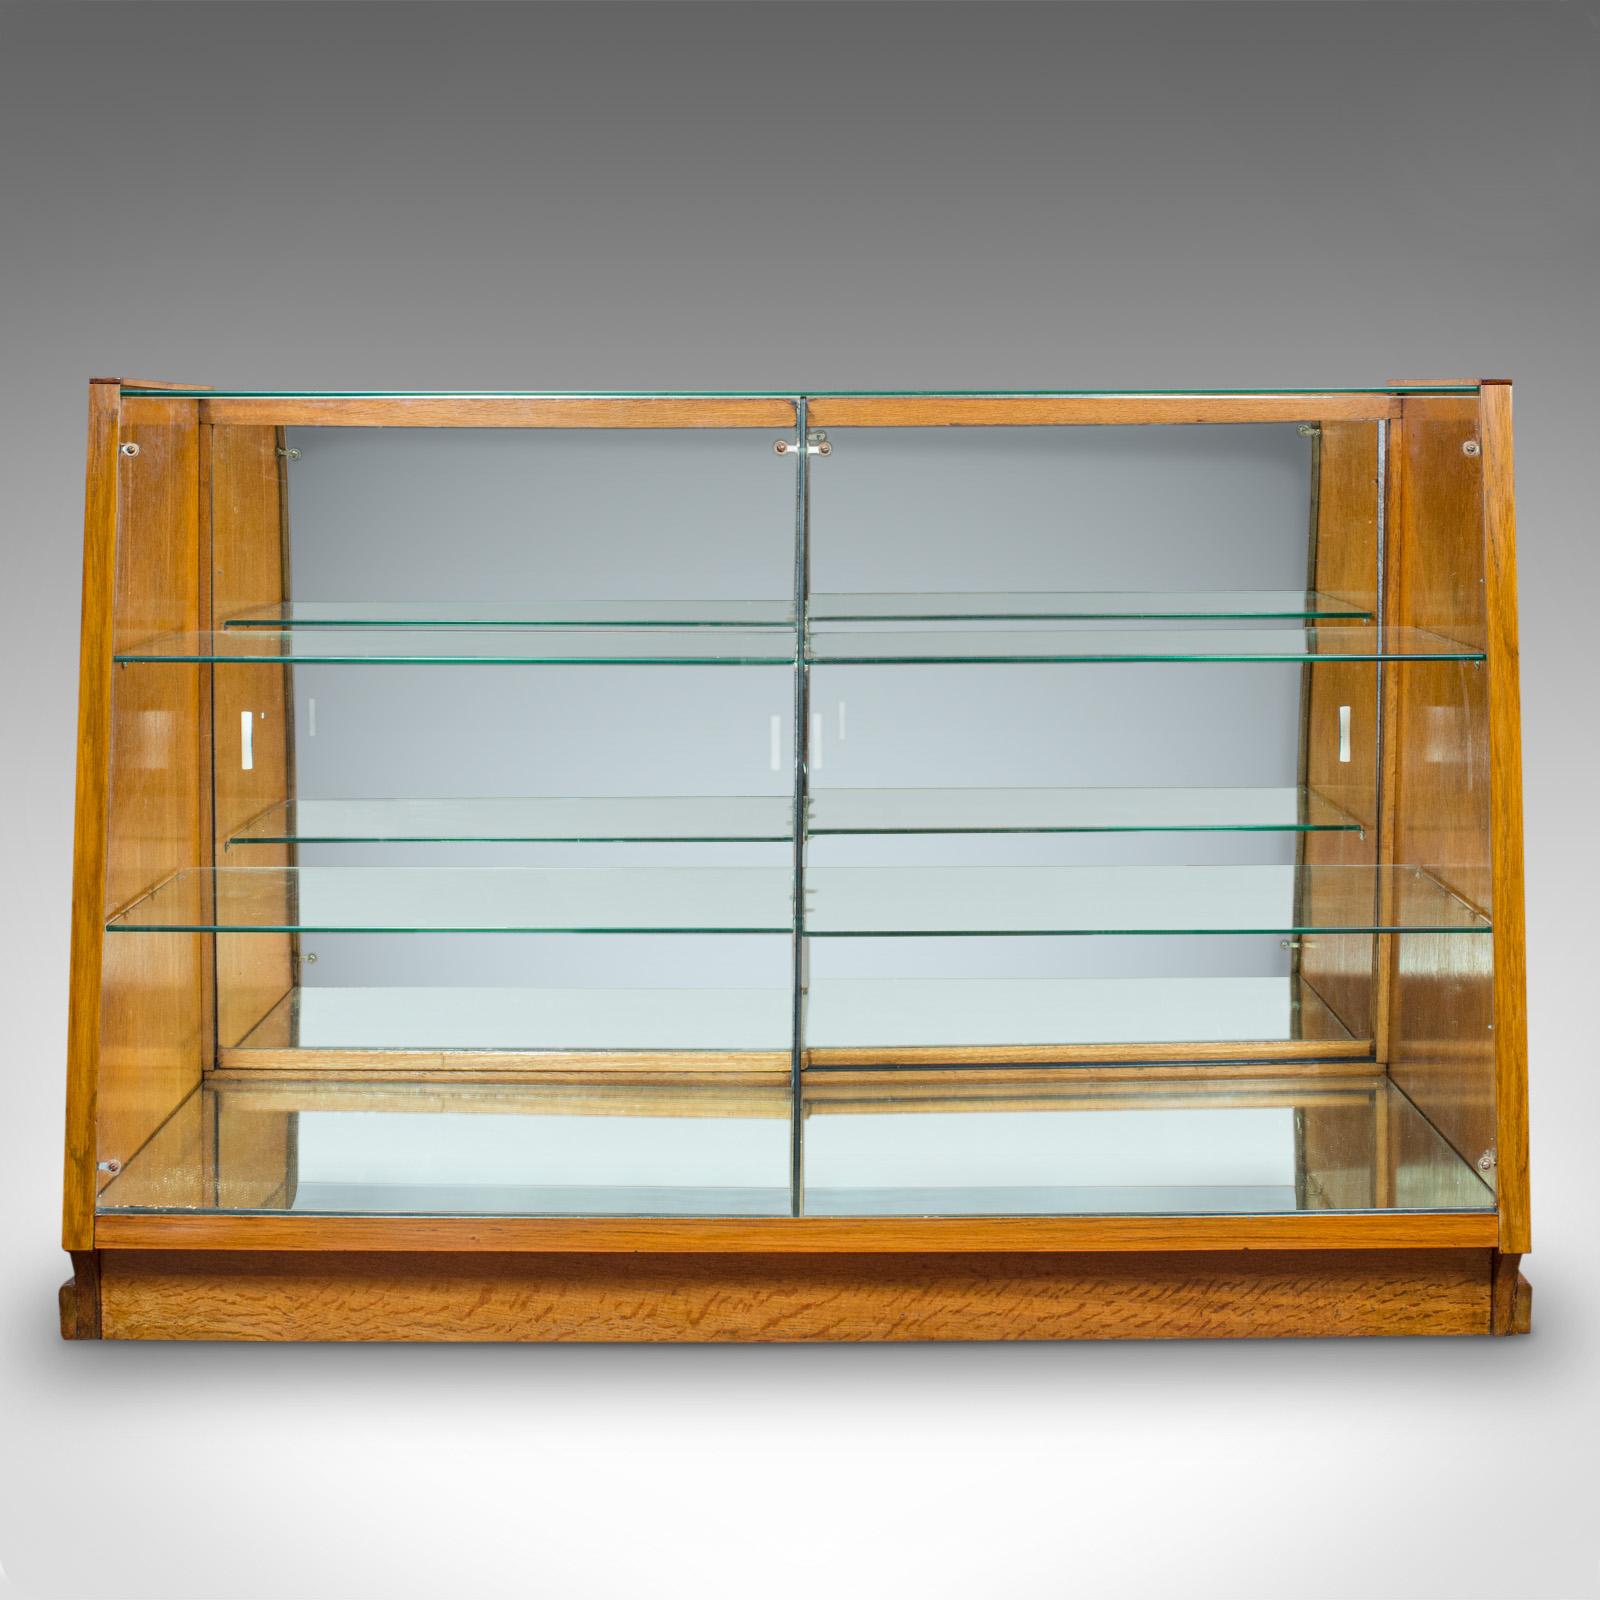 This is a vintage retail display cabinet. An English, oak and glass haberdashery or shop showcase, dating to the Art Deco period, circa 1930.

Pleasingly shaped, bright display cabinet
Displaying a desirable aged patina
Oak veneer shows rich